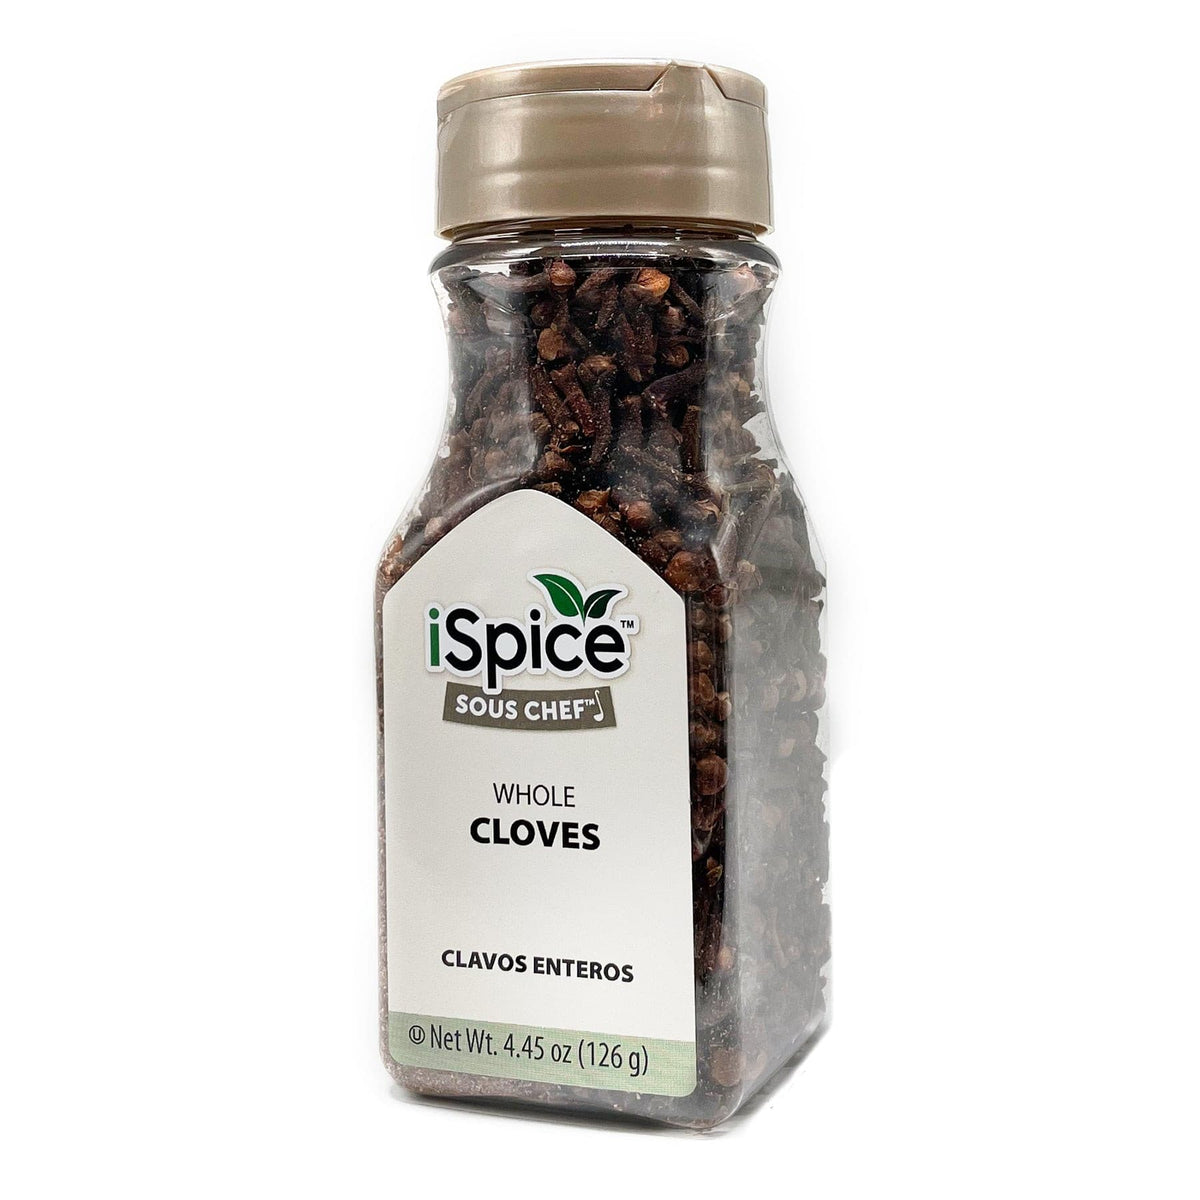 Spice up your cooking with our Simply Harvest Blend spice collection. Hand-picked ingredients from around the globe make every recipe extra special. Get it now!